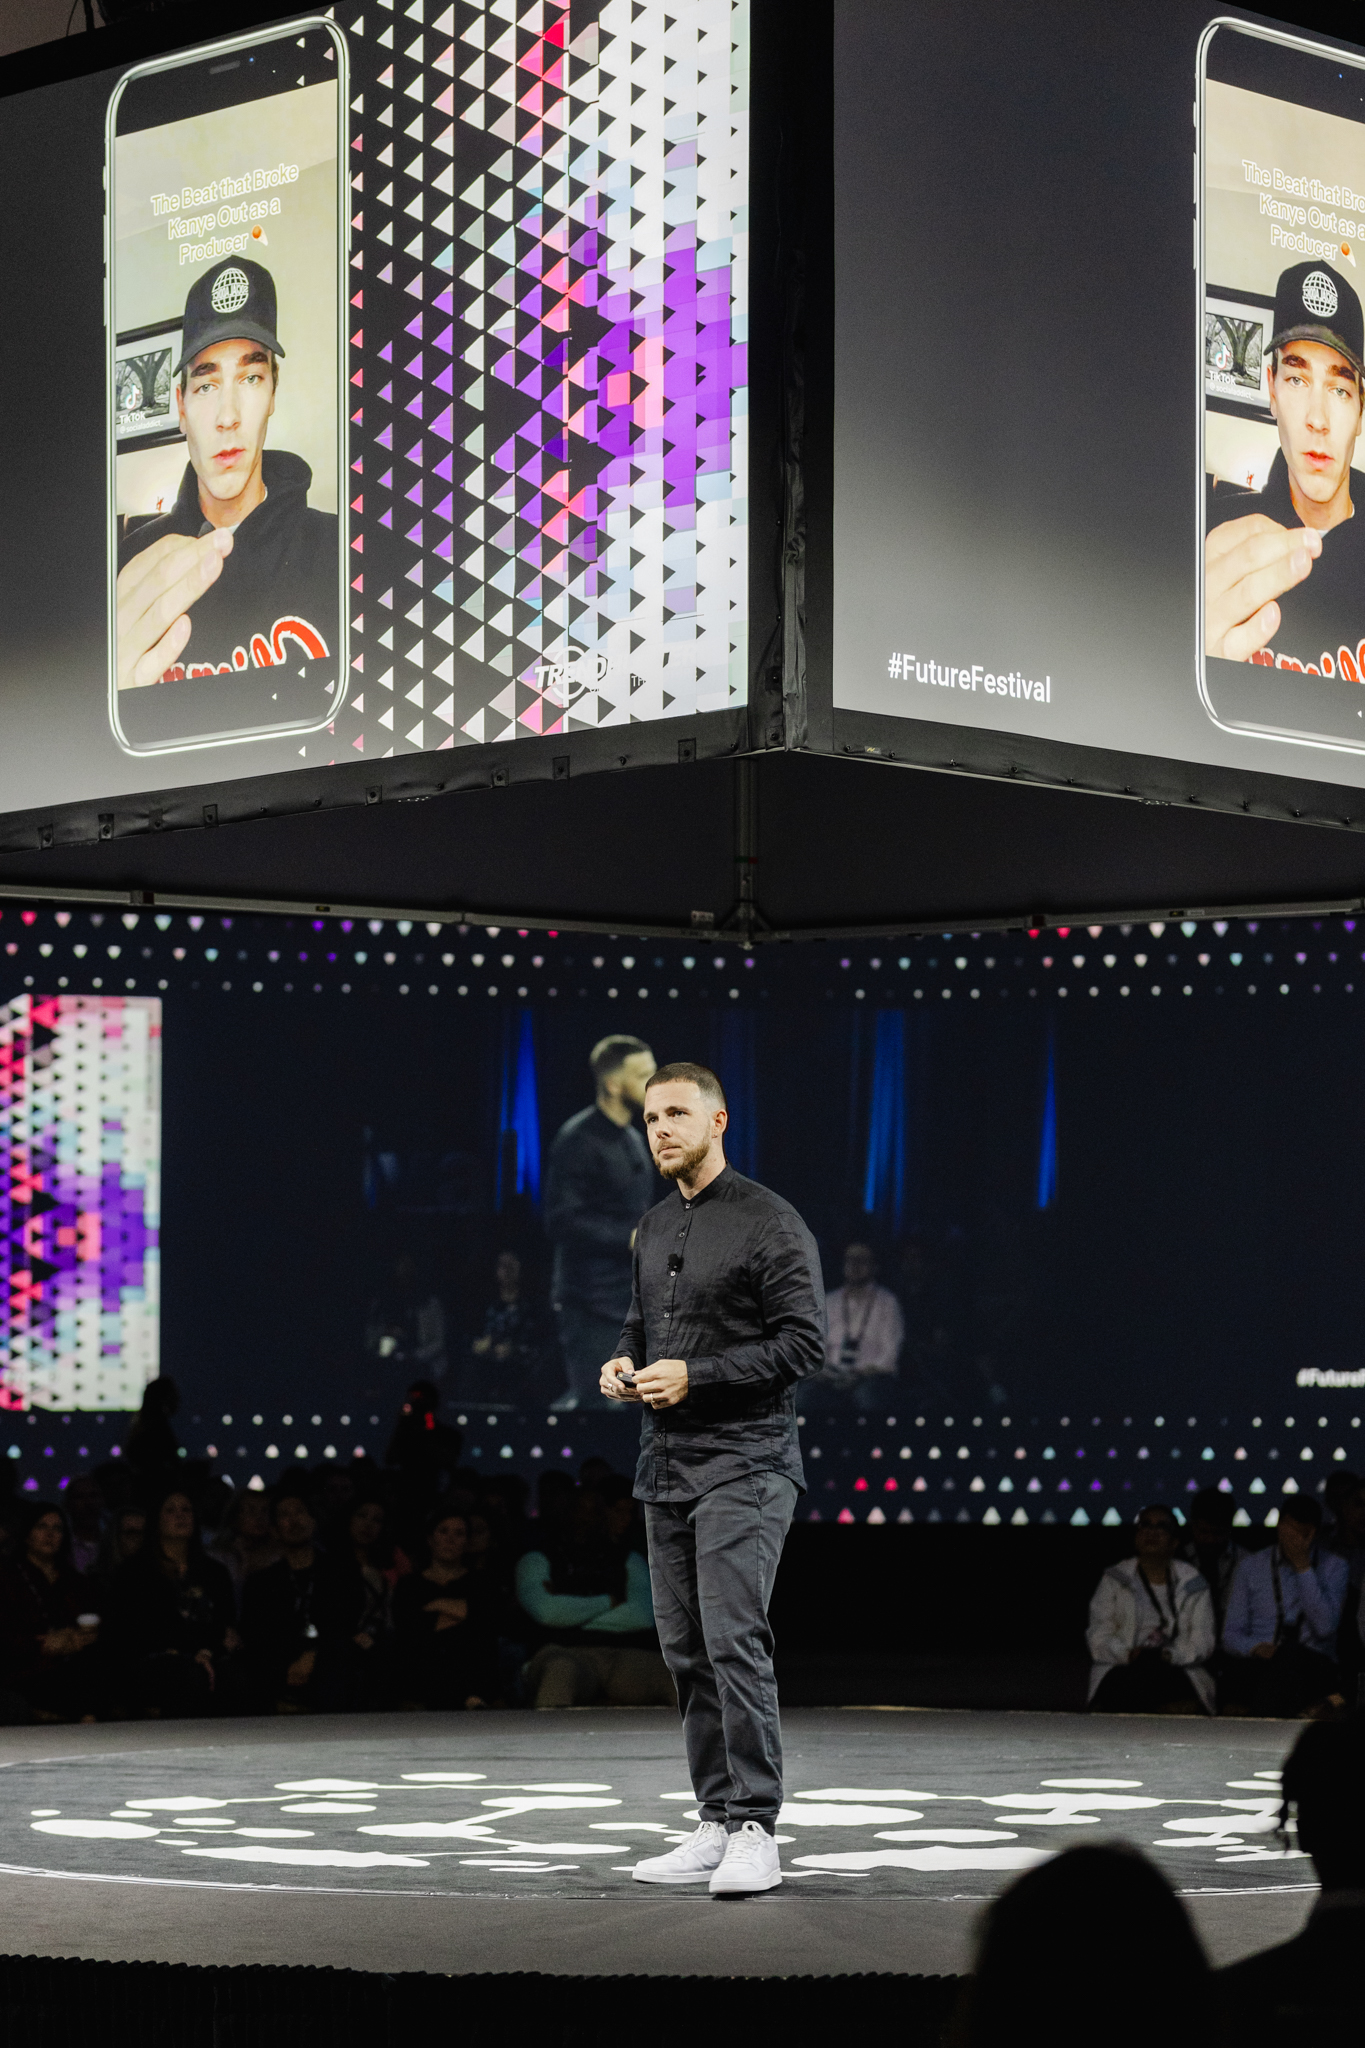 An event photographer captures a man standing on stage in front of a large screen.